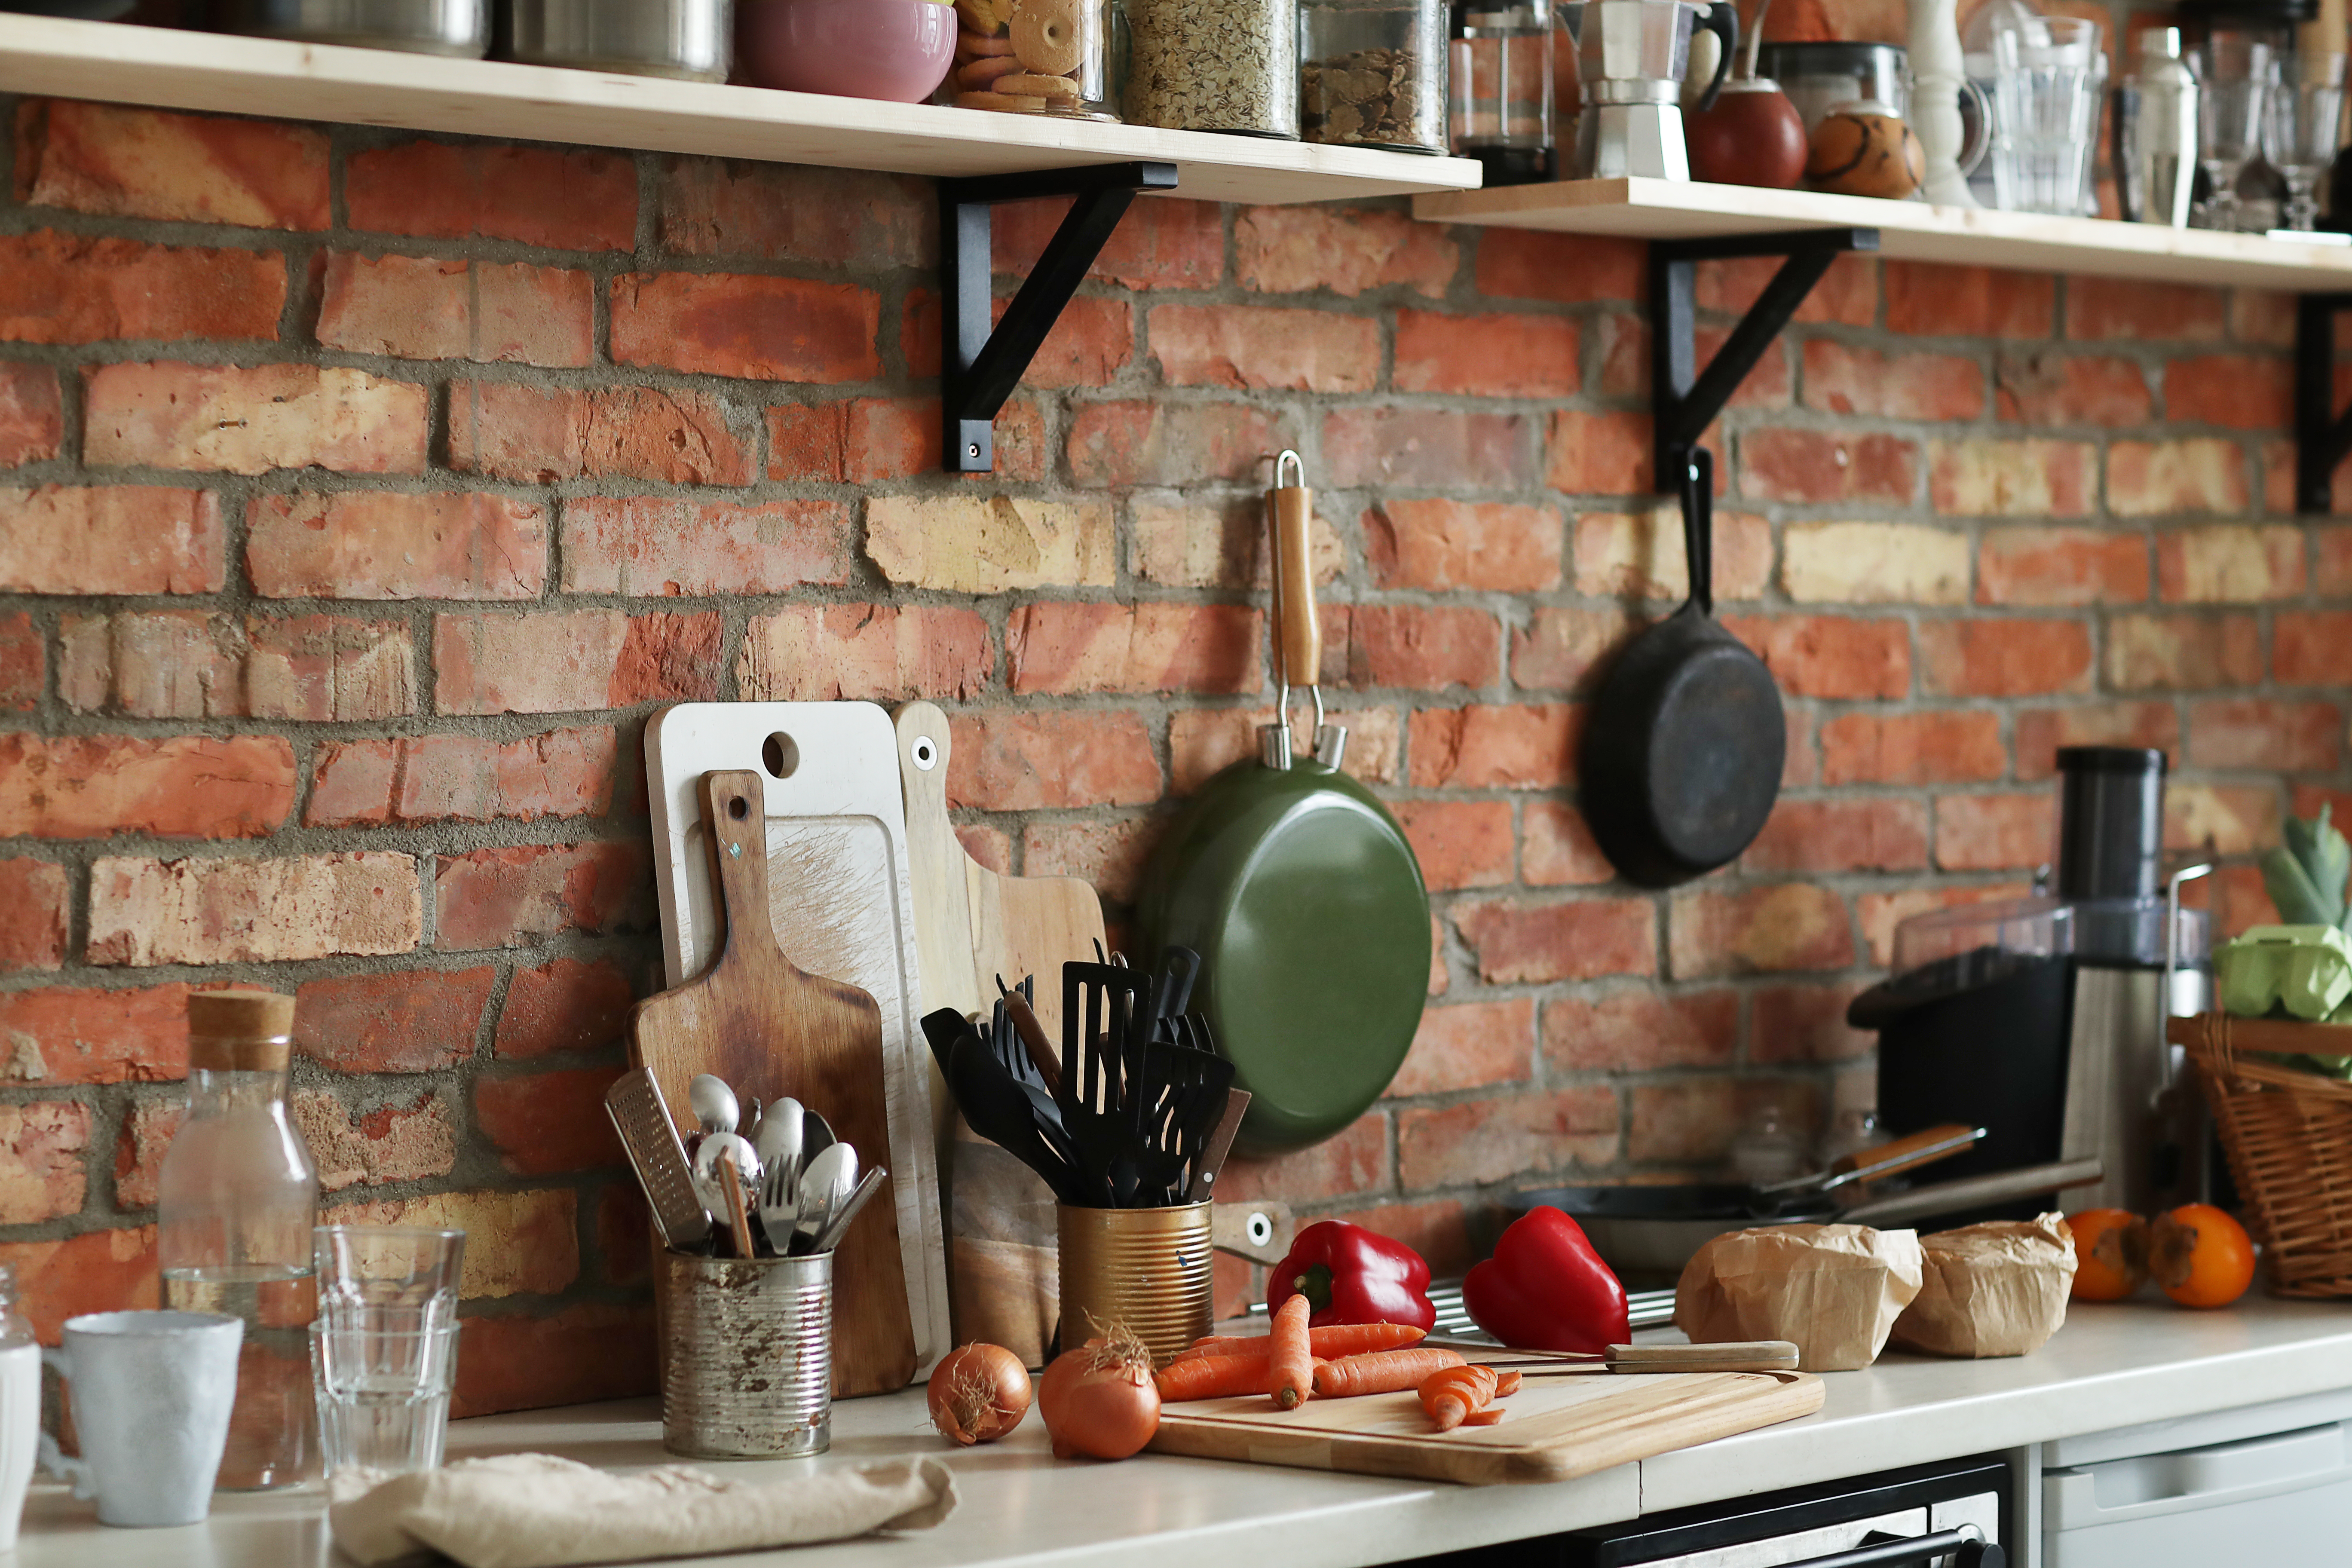 a kitchen scene with pots and pans